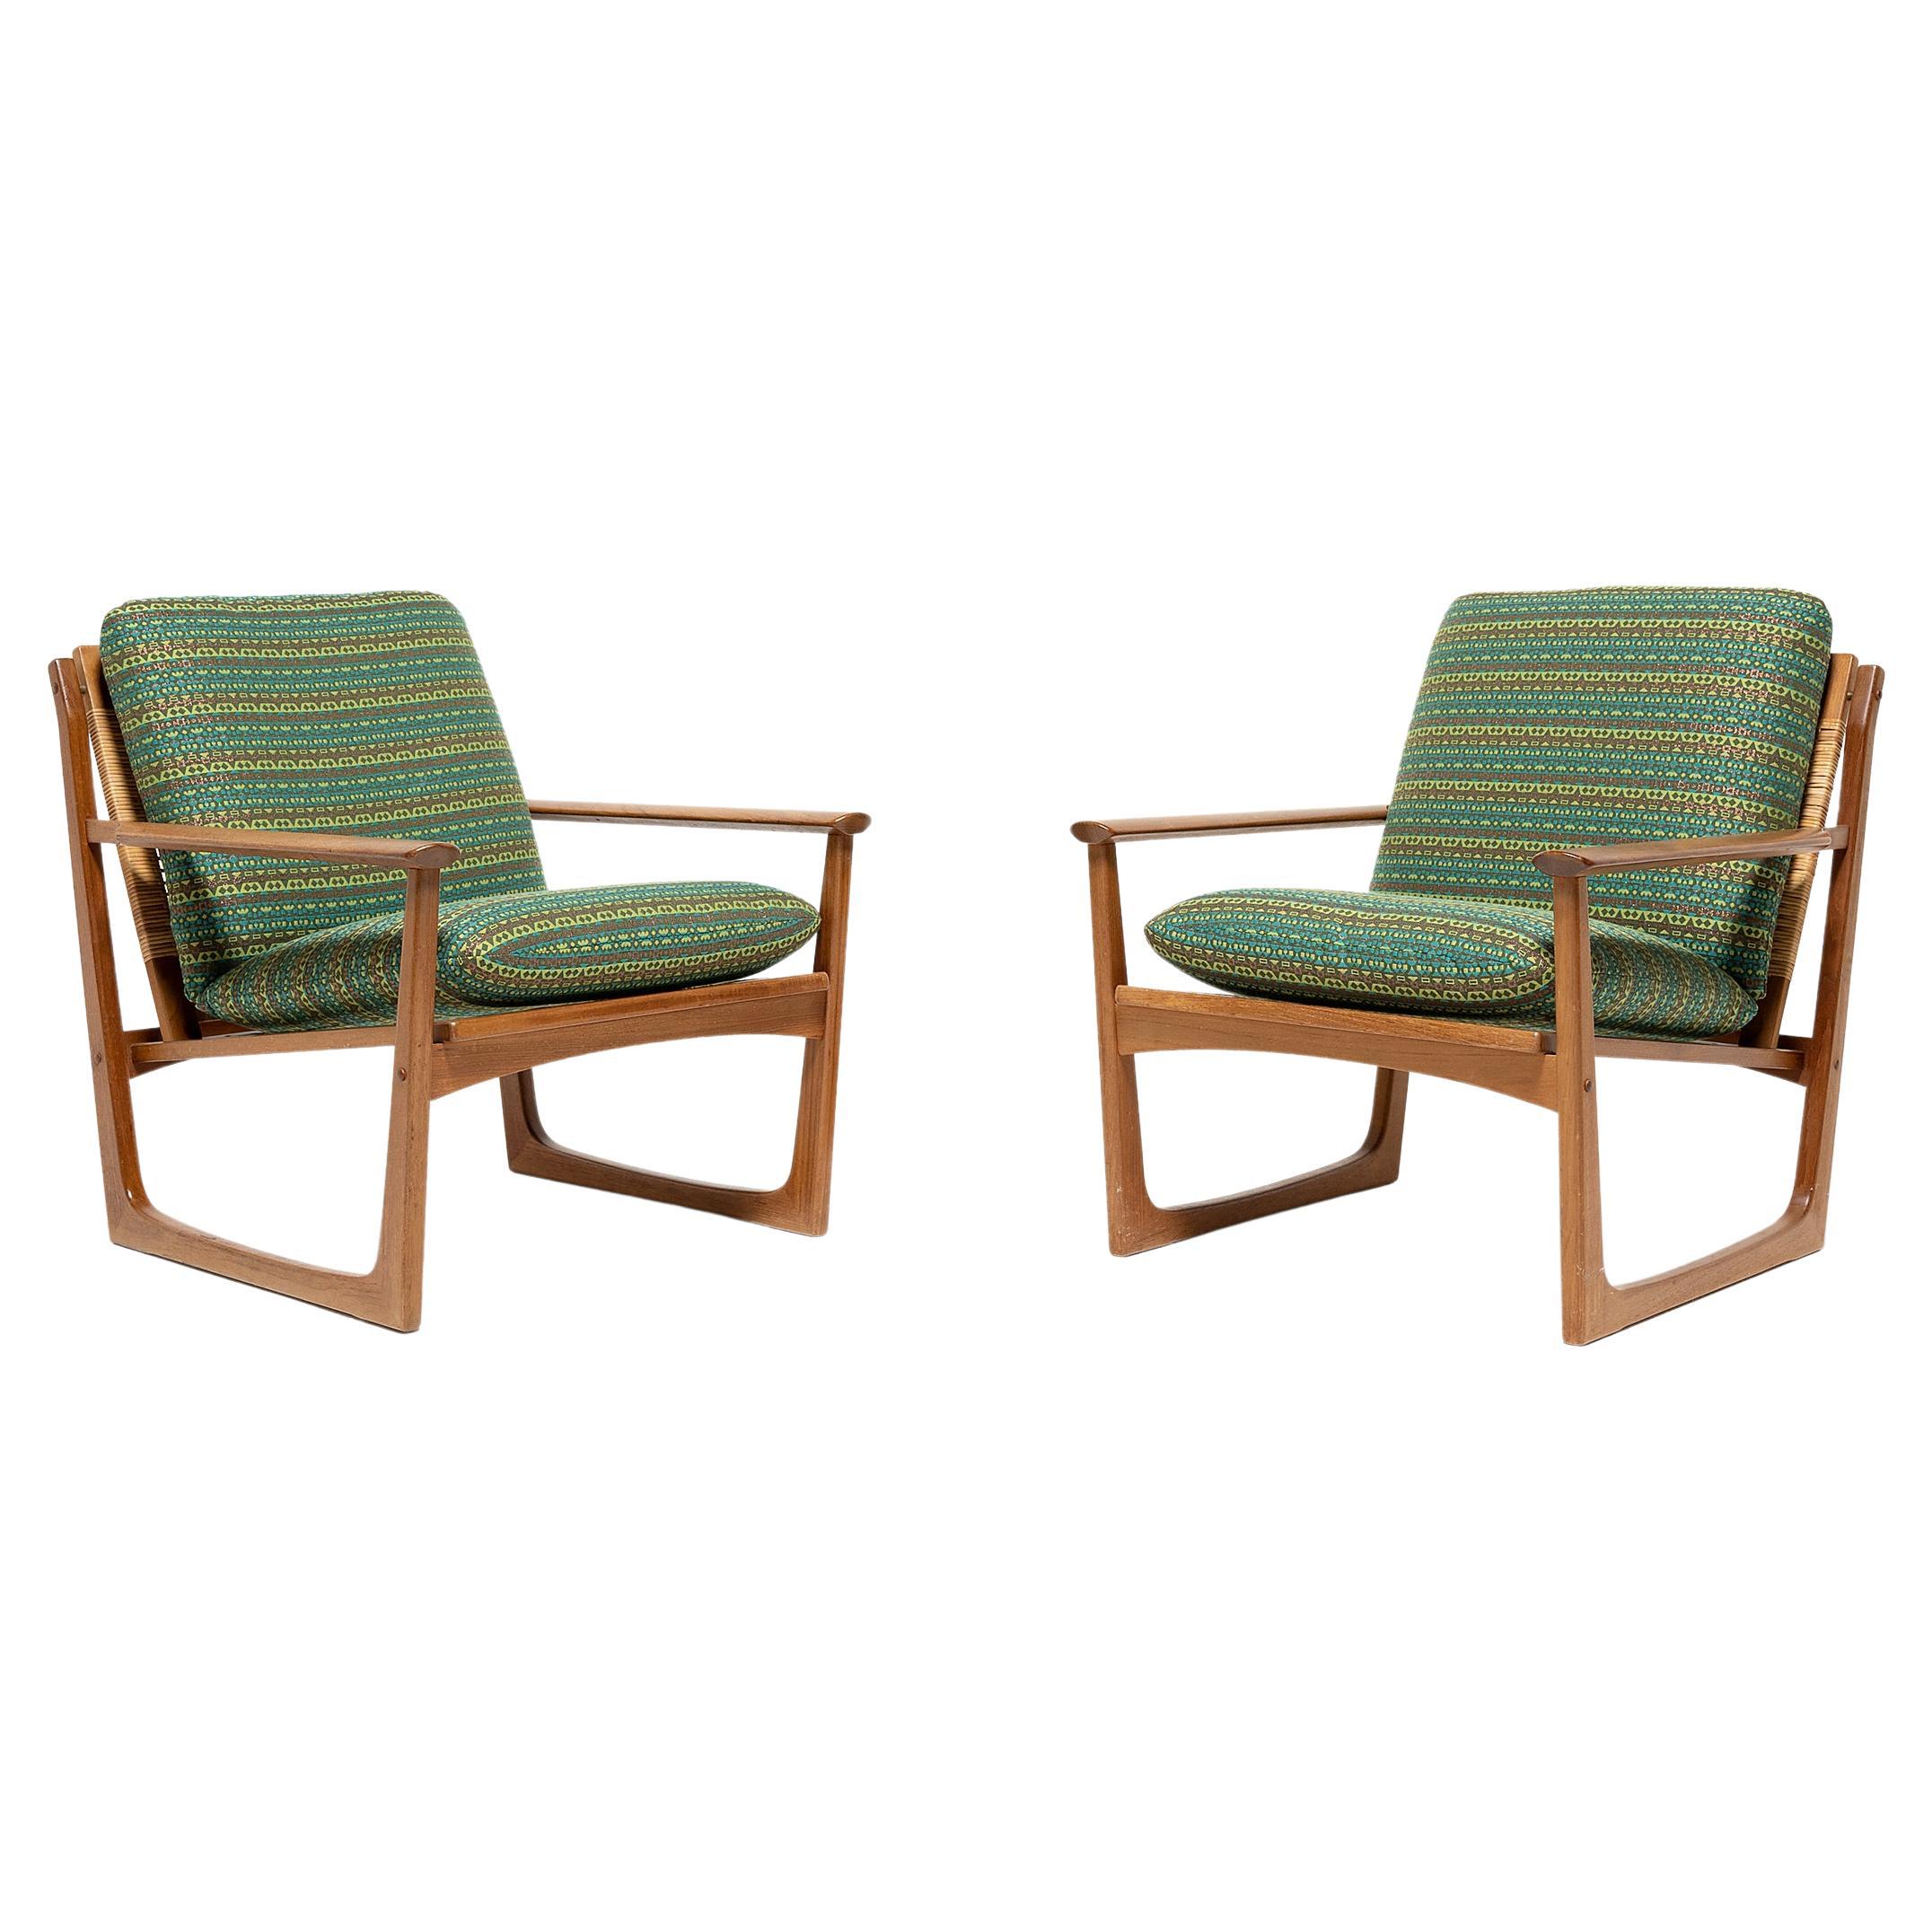 Pair of Danish Modern Cane Back Armchairs by Hans Olsen, c. 1960 For Sale